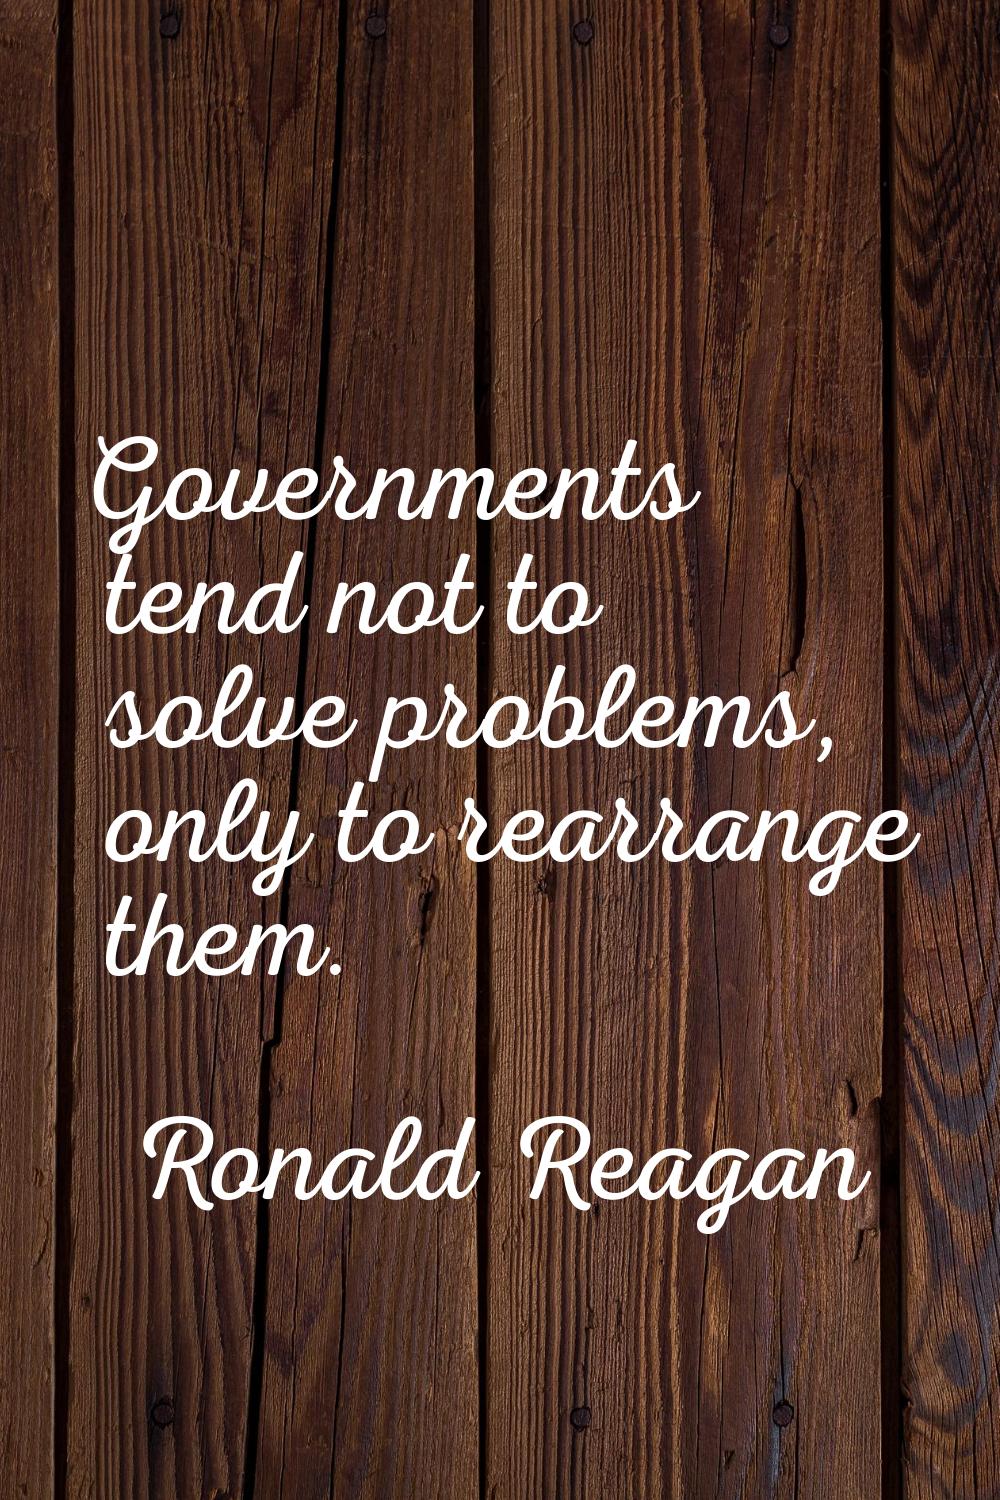 Governments tend not to solve problems, only to rearrange them.